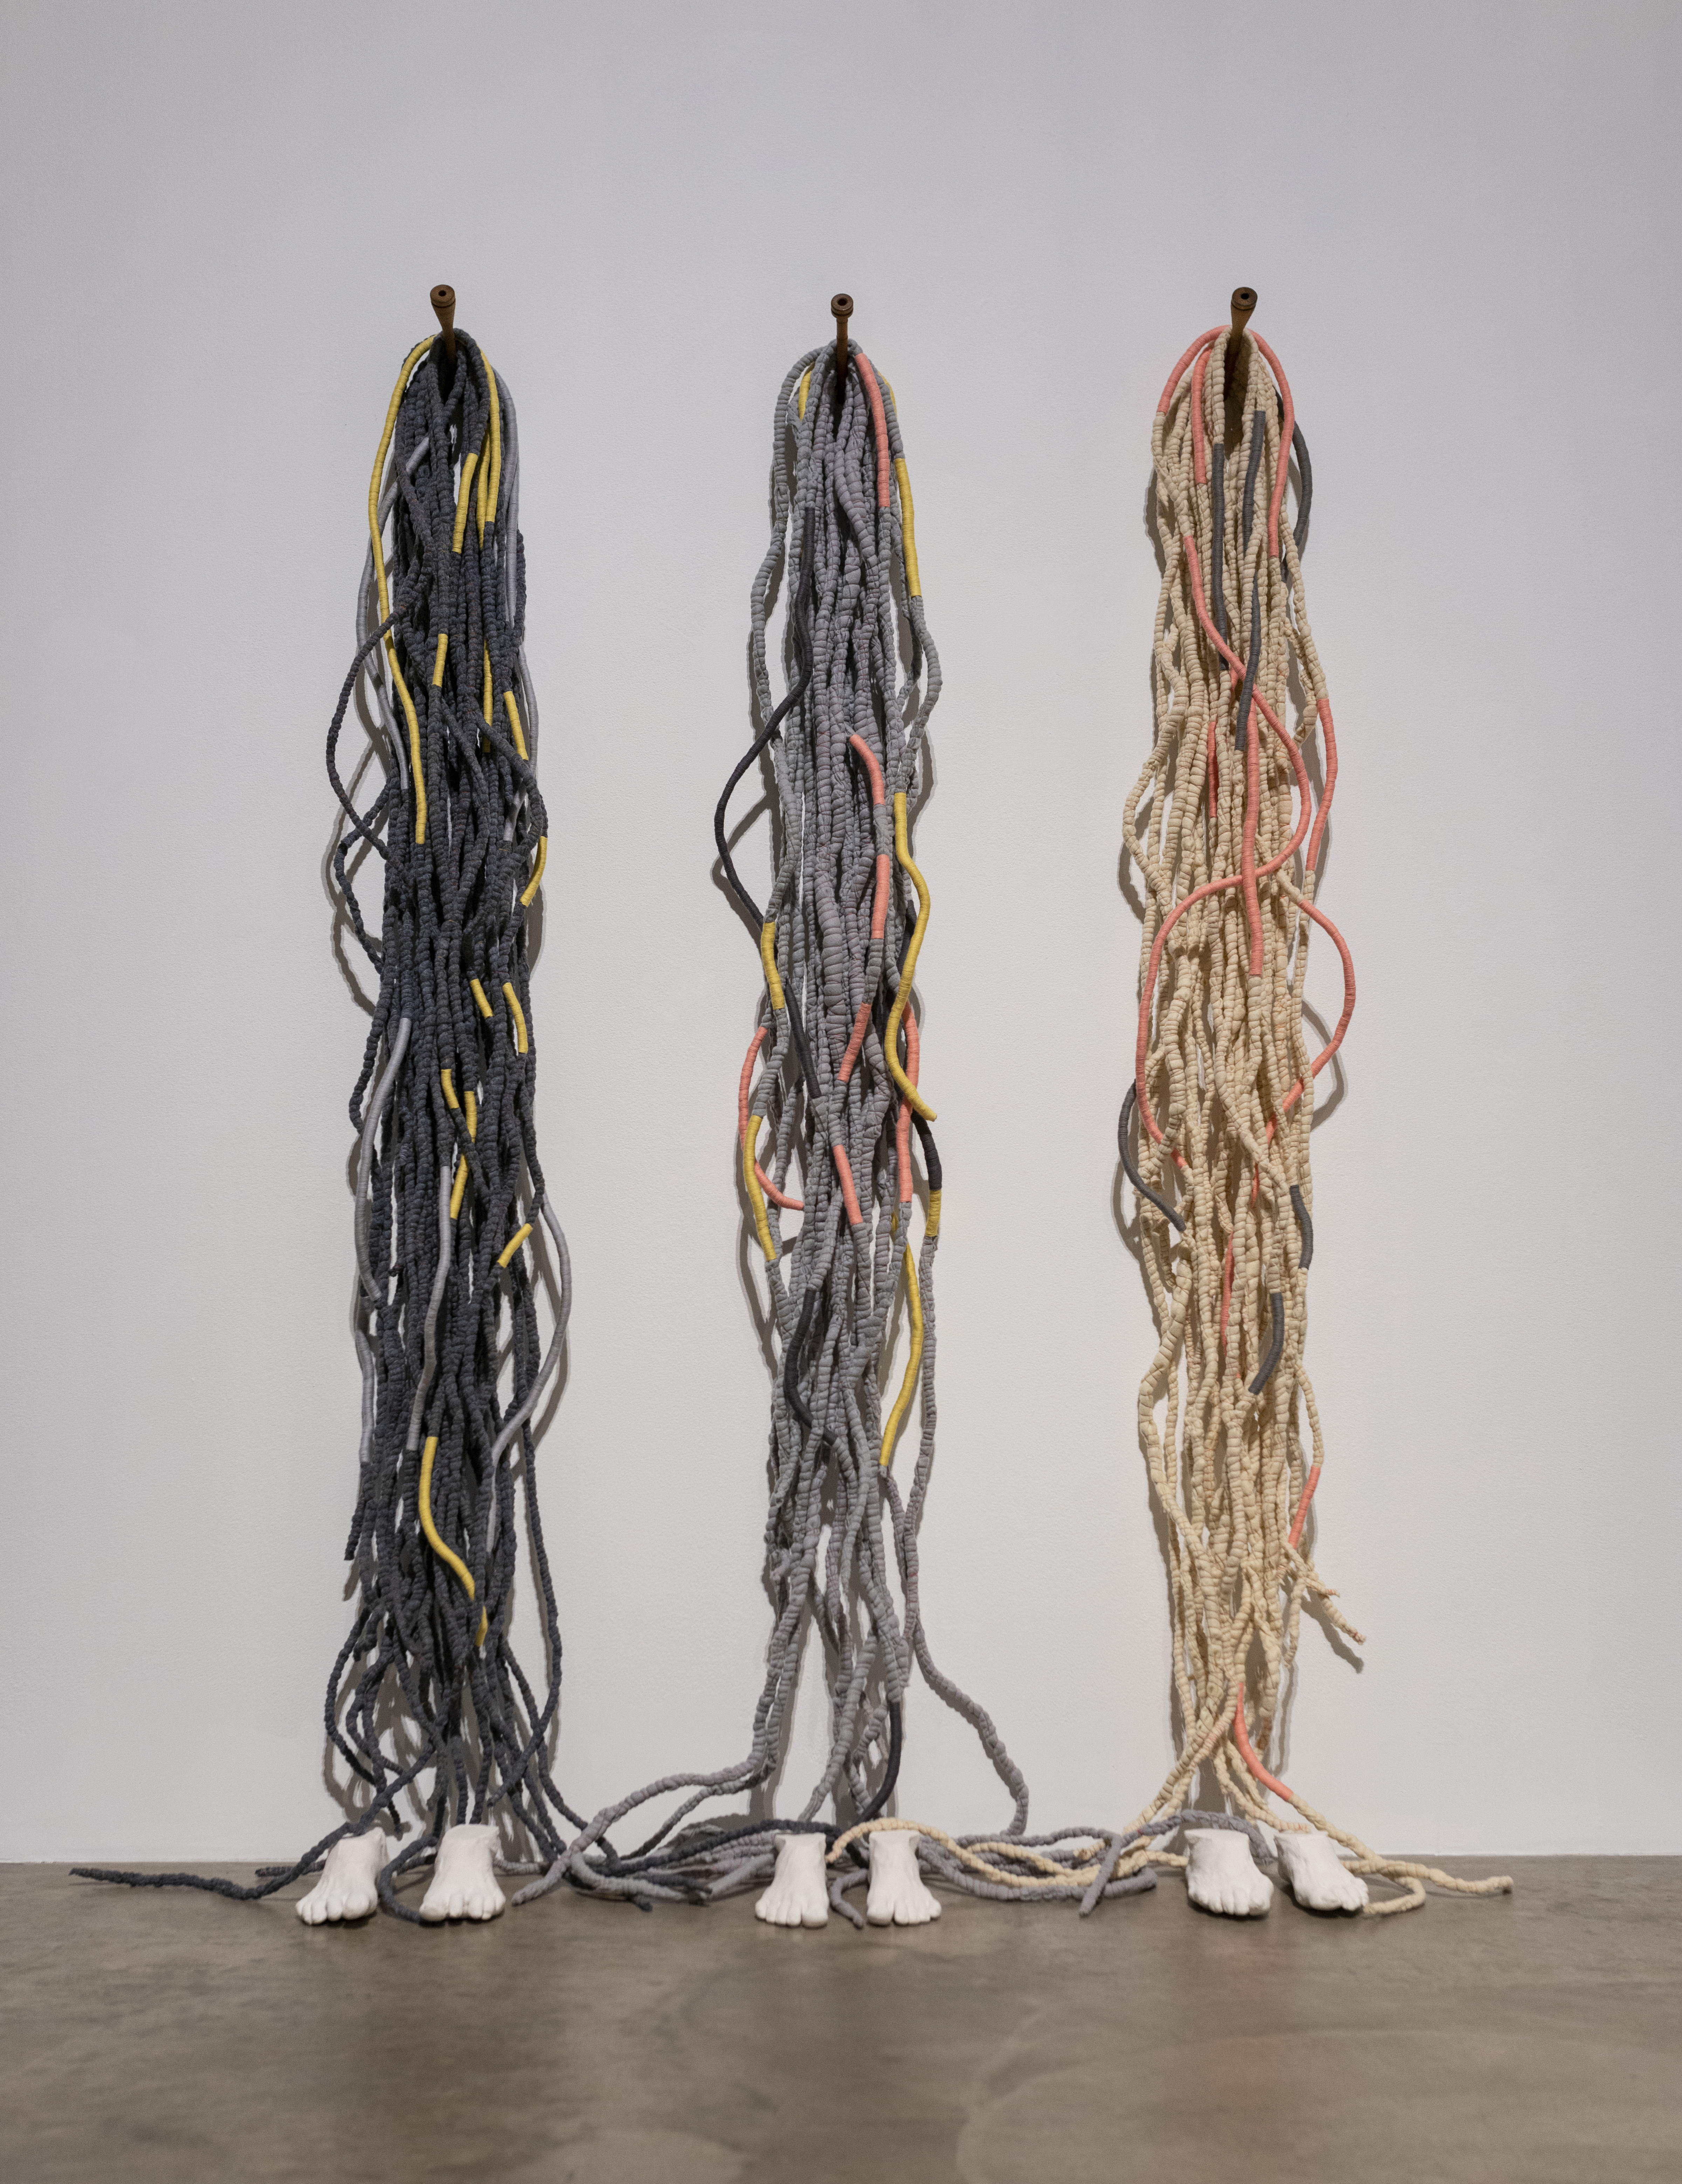 Three sets of different colored rope – beige, gray, and black – are equidistantly nailed to a wall. On the floor at the bottom of each set of rope is a pair of individualized white plaster cast feet.